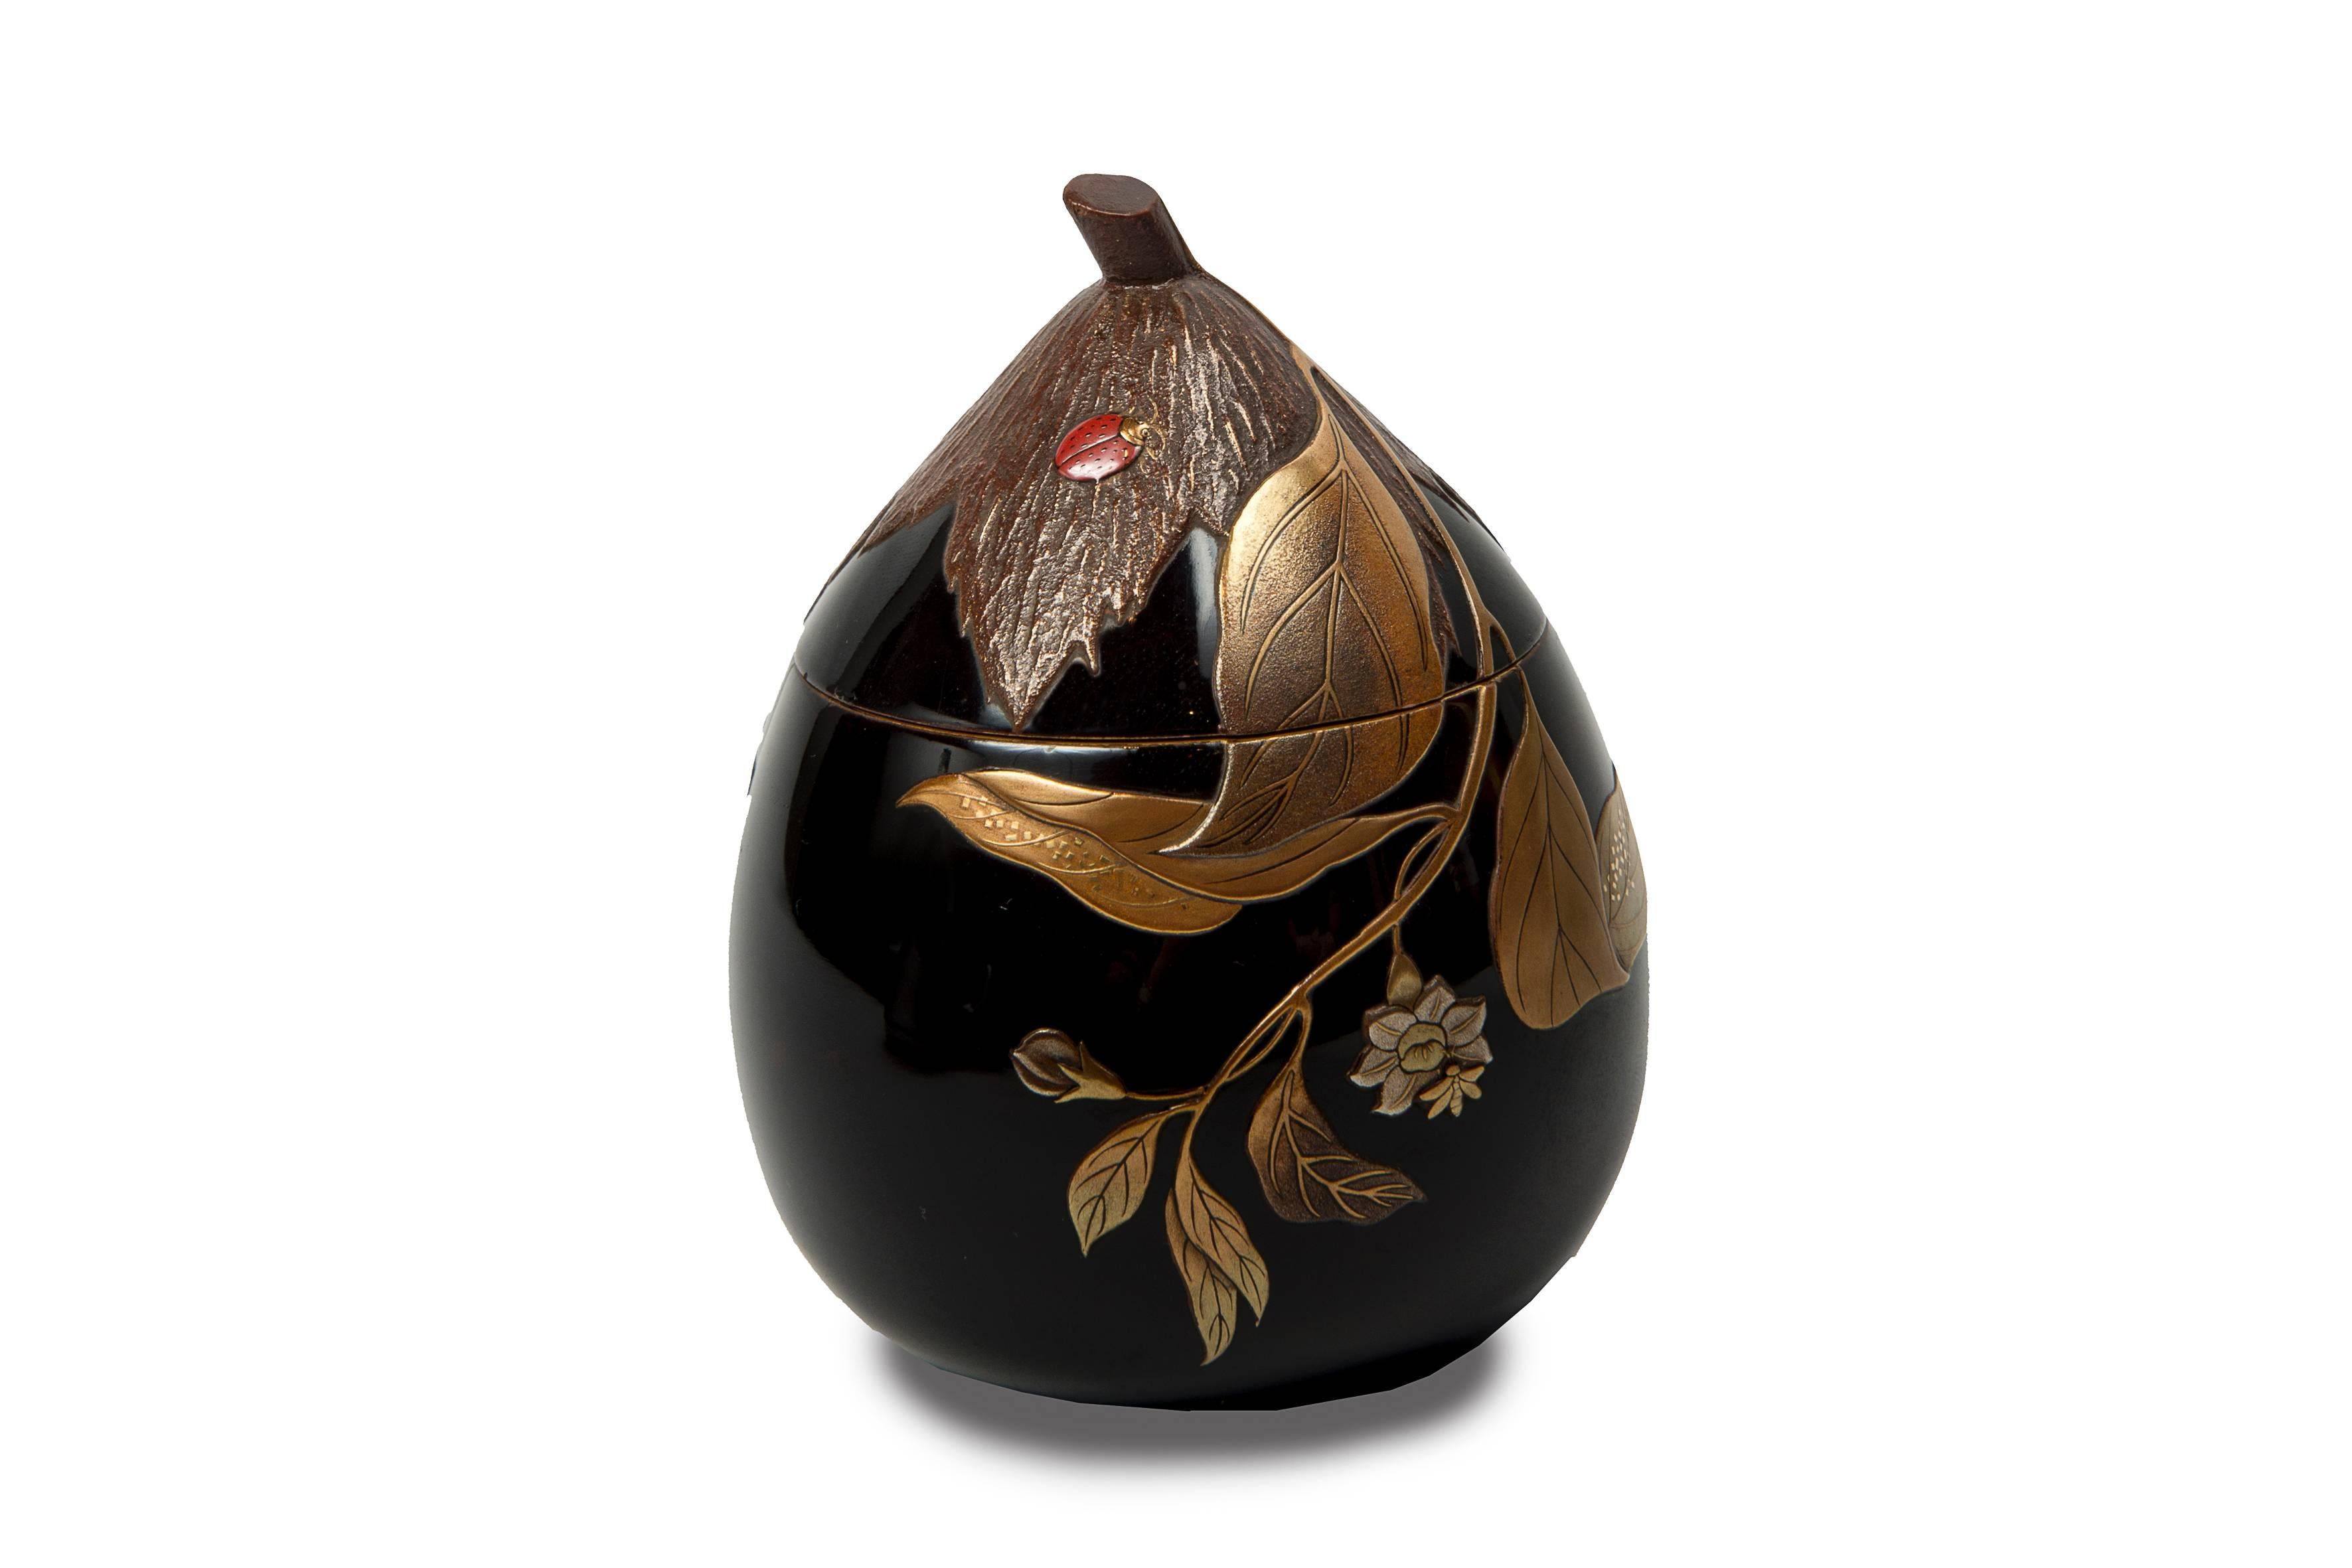 Koro (incense burner) in the shape of persimmon in black lacquer with a gold, silver and red lacquer decor in hira maki-e of a ladybug on a leaf, a grasshopper and a bee in the middle of flowering branches.
Inside of the lid in nashi-ji lacquer.